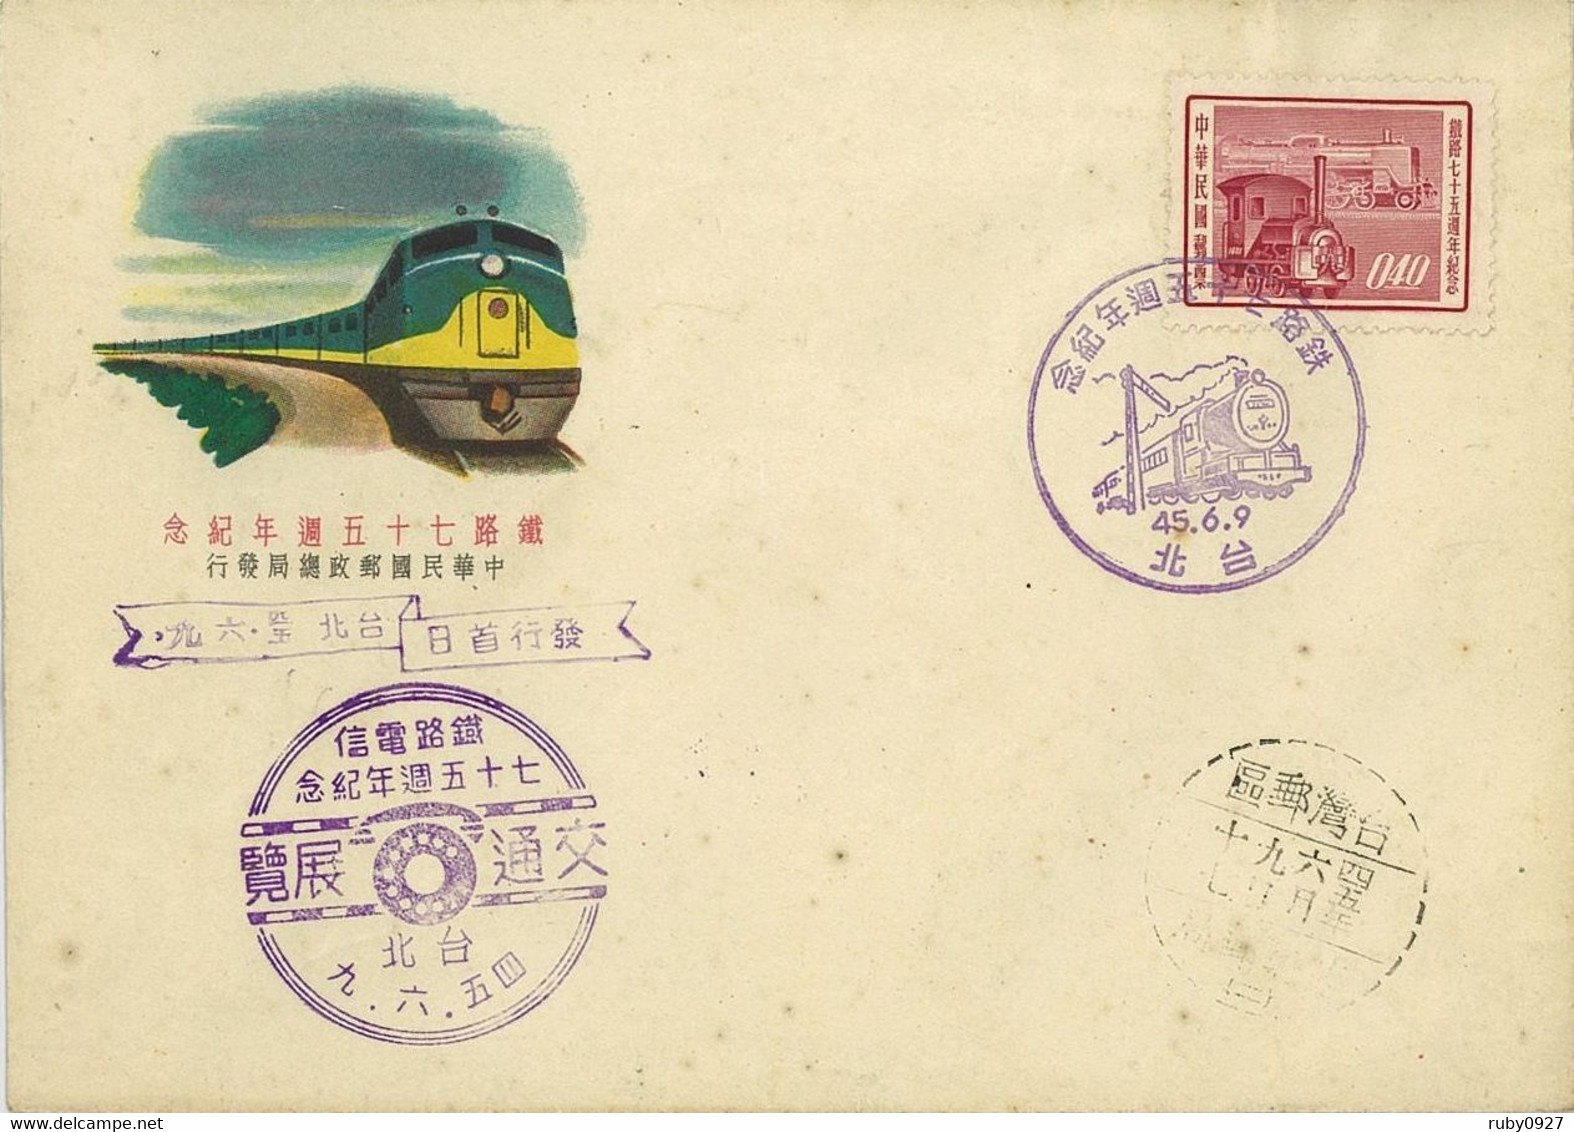 TAIWAN 1956 CHINA CHINESE RAILWAY 75TH ANNIVERSAIRY FIRST DAY COVER, TRAIN, TRAINS, LOCOMOTIVE, TRANSPORT - Lettres & Documents